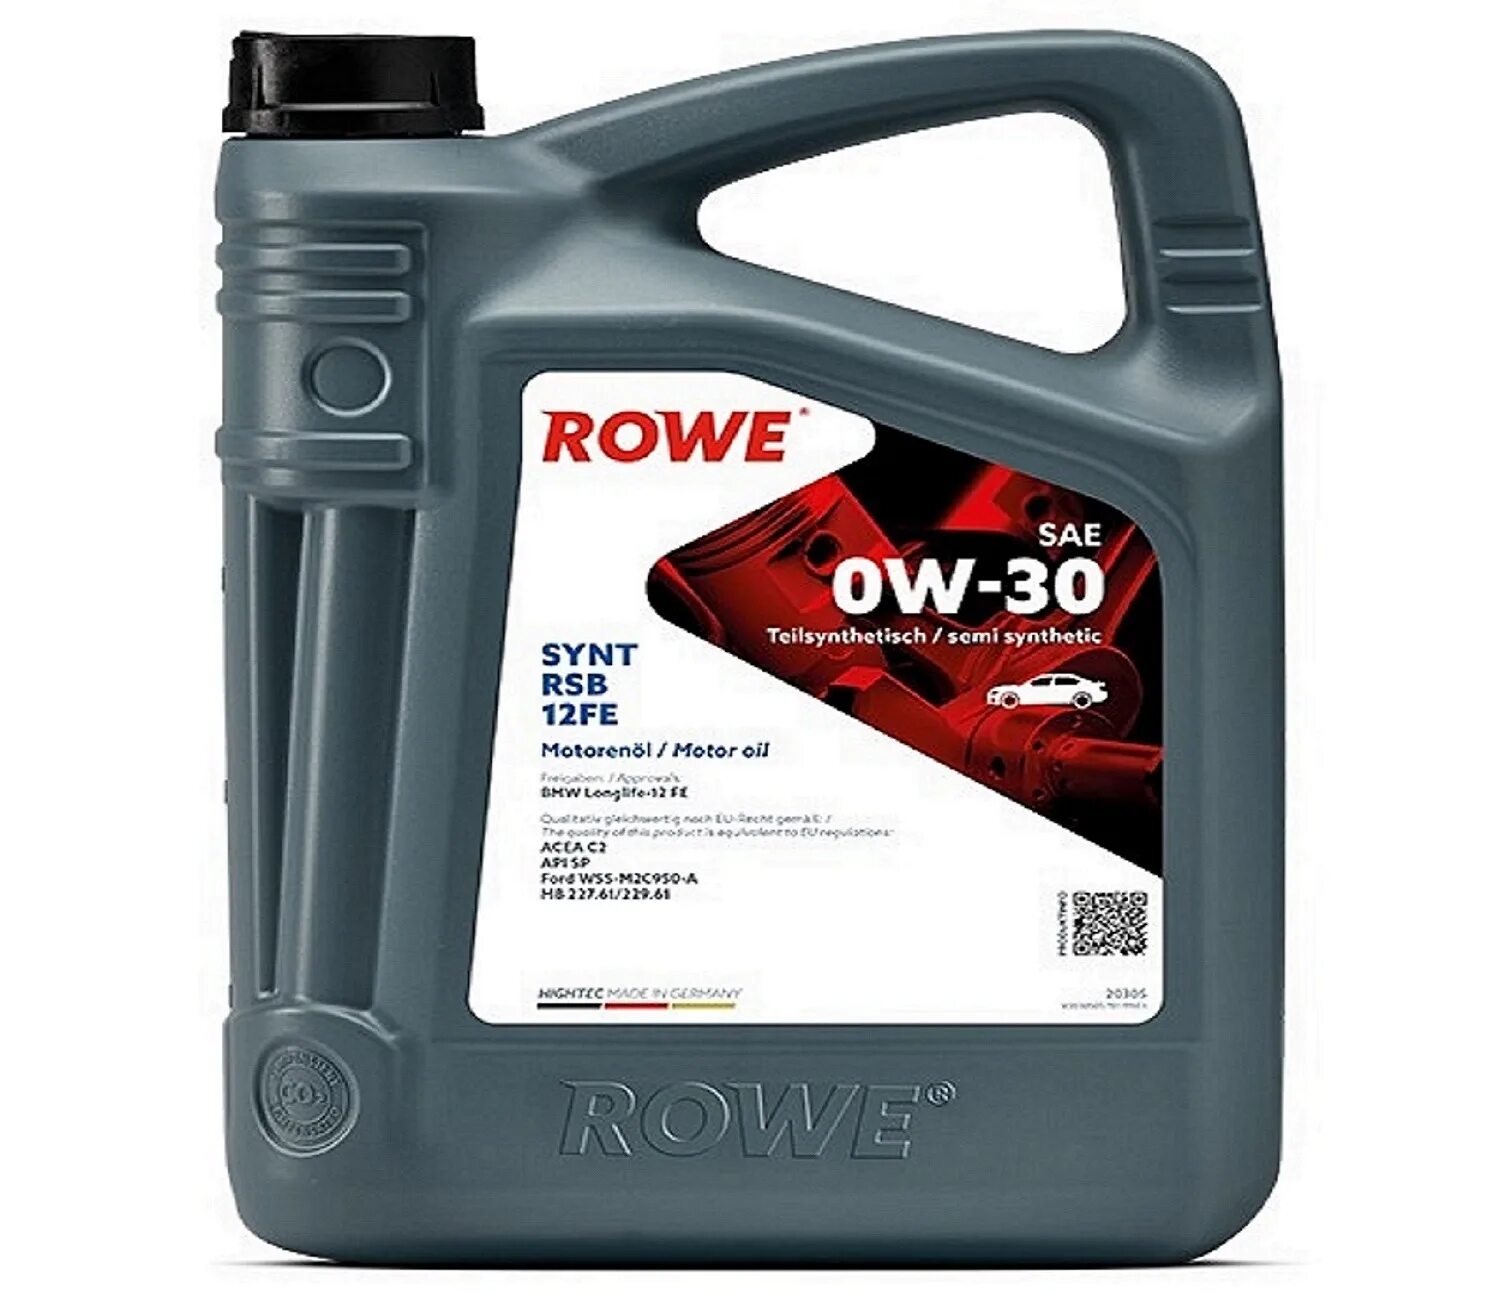 Rowe sae 5w 30. Rowe 5w30 Synt. Rowe Hightec Multi Synt DPF SAE 5w-30. Rowe 5w30 a5/b5. Моторное масло Rowe Hightec Synt RS,5w30,5.